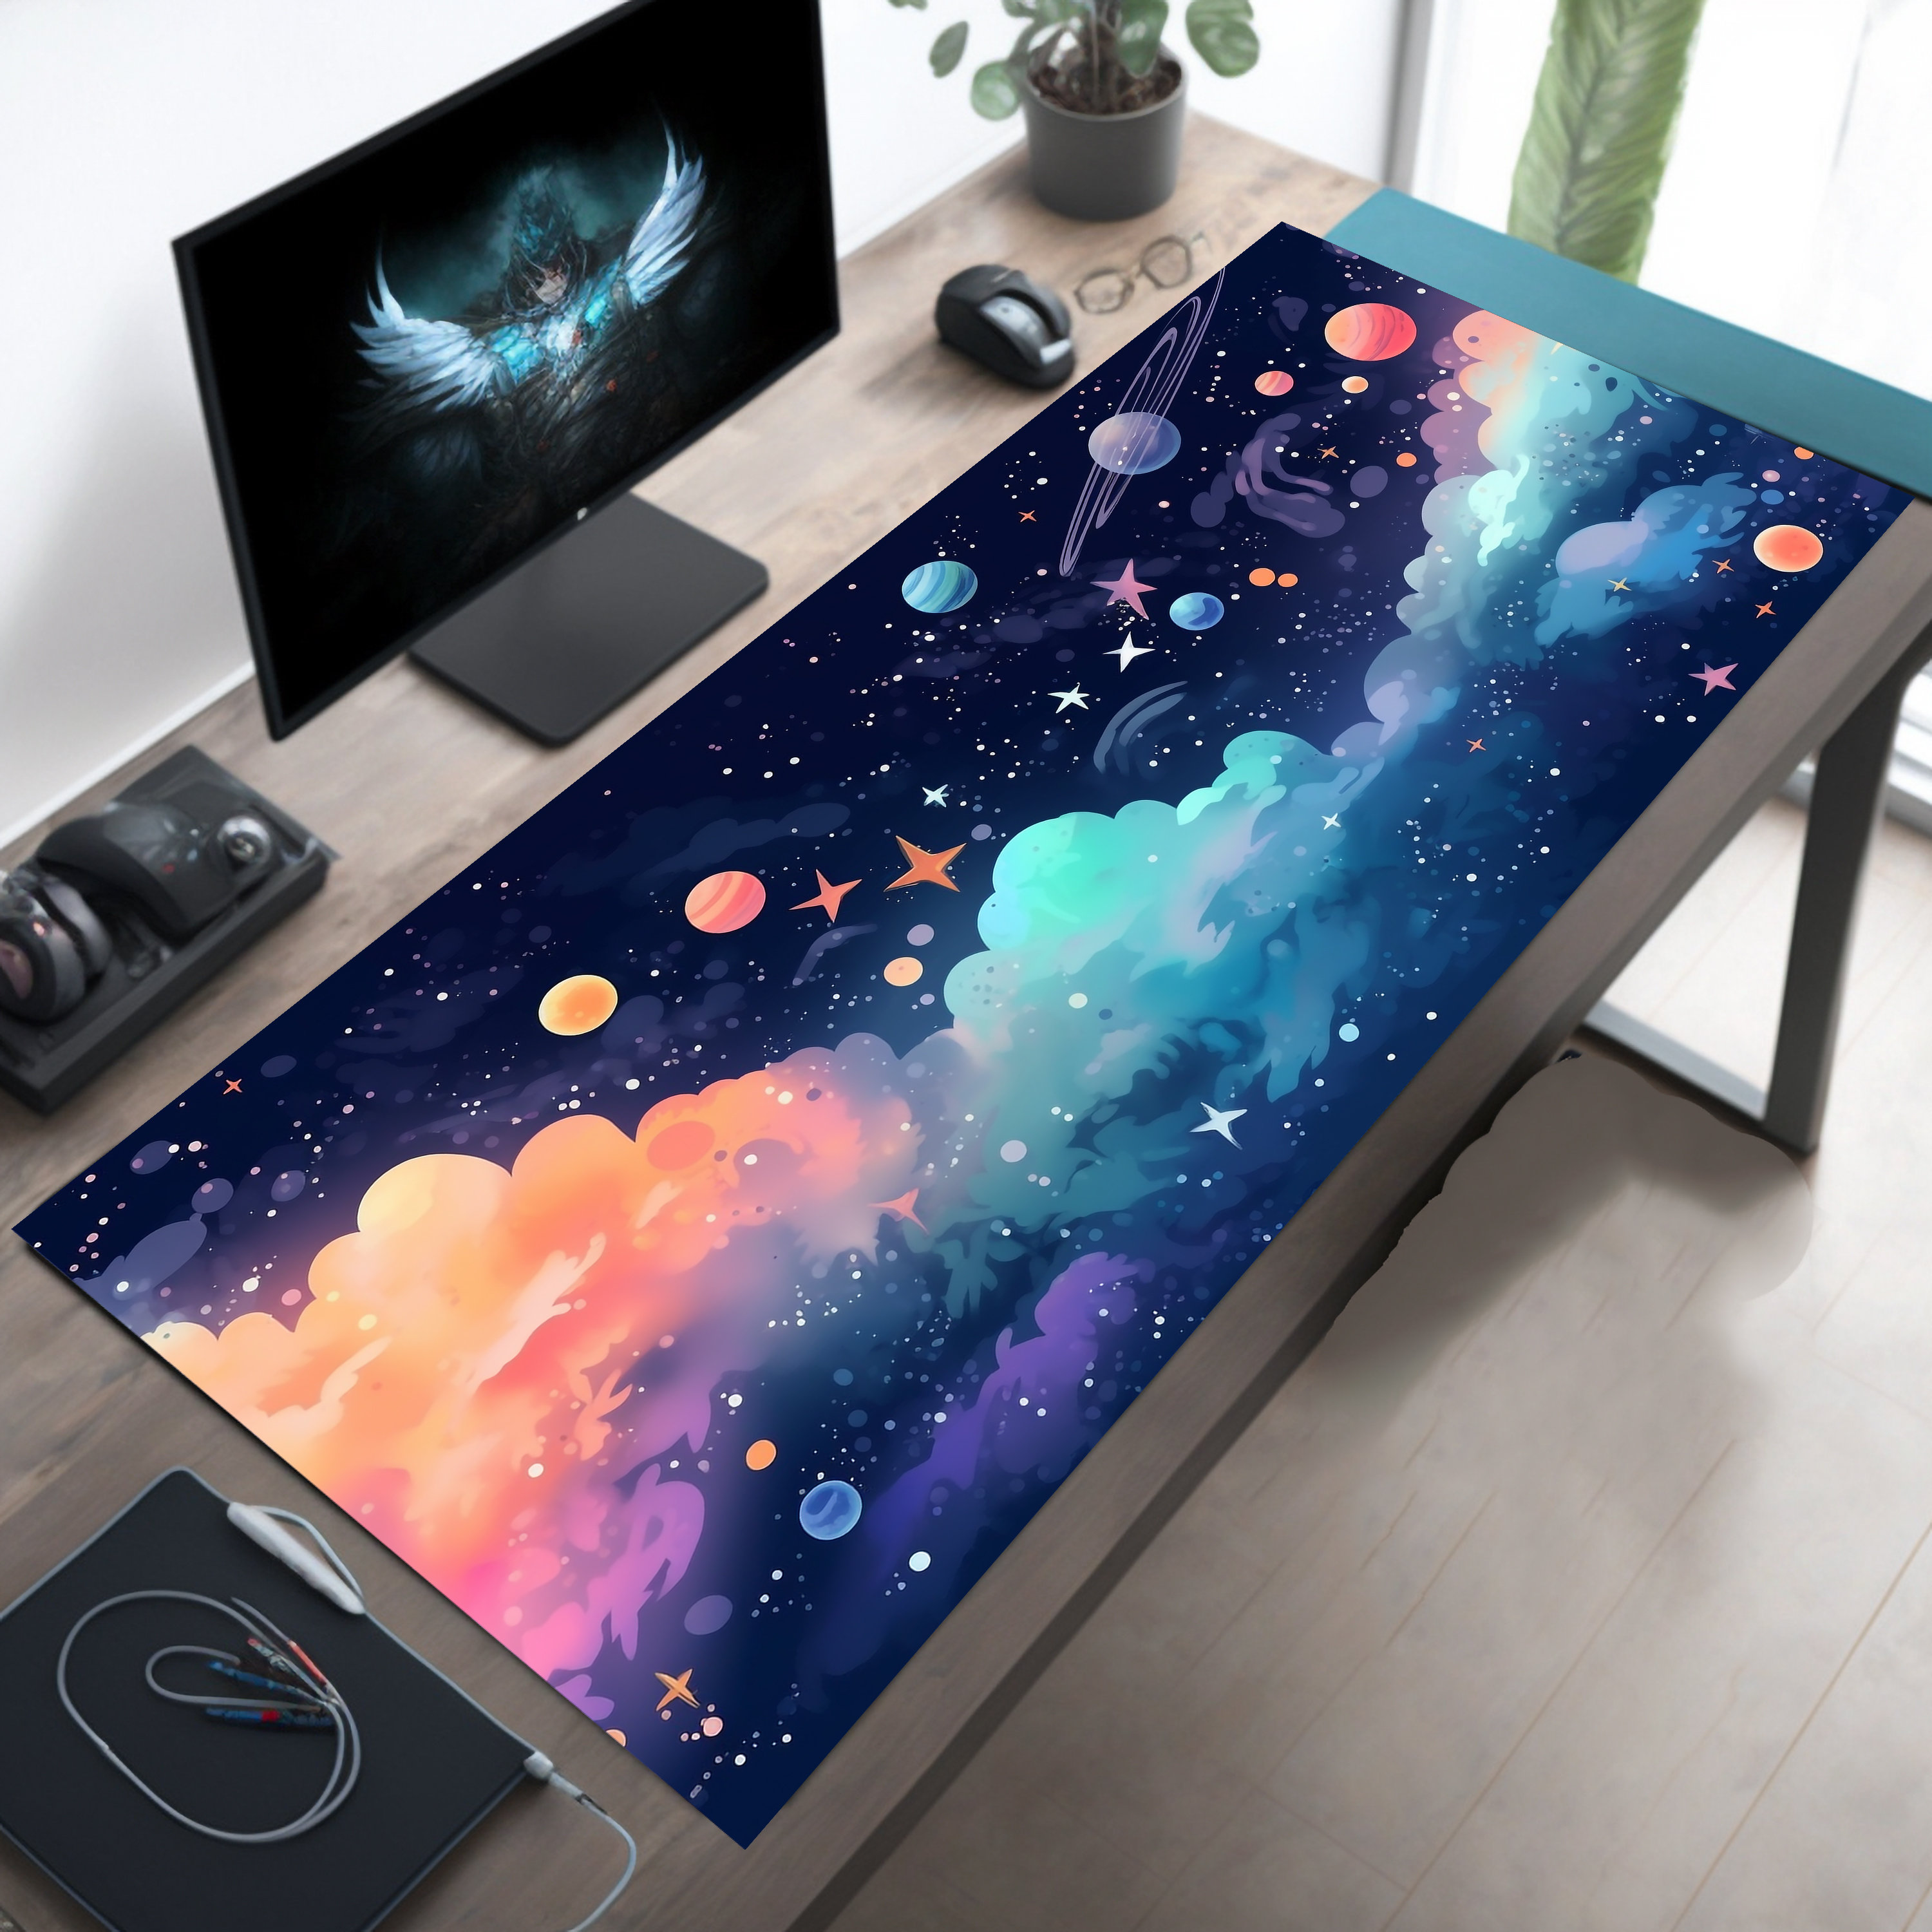 Cosmic Sky Mouse Pad Large Gamer Keyboard Office Accessories for Desk  Gadgets Pc Cabinet Games Computer Desks Support Laptop - AliExpress